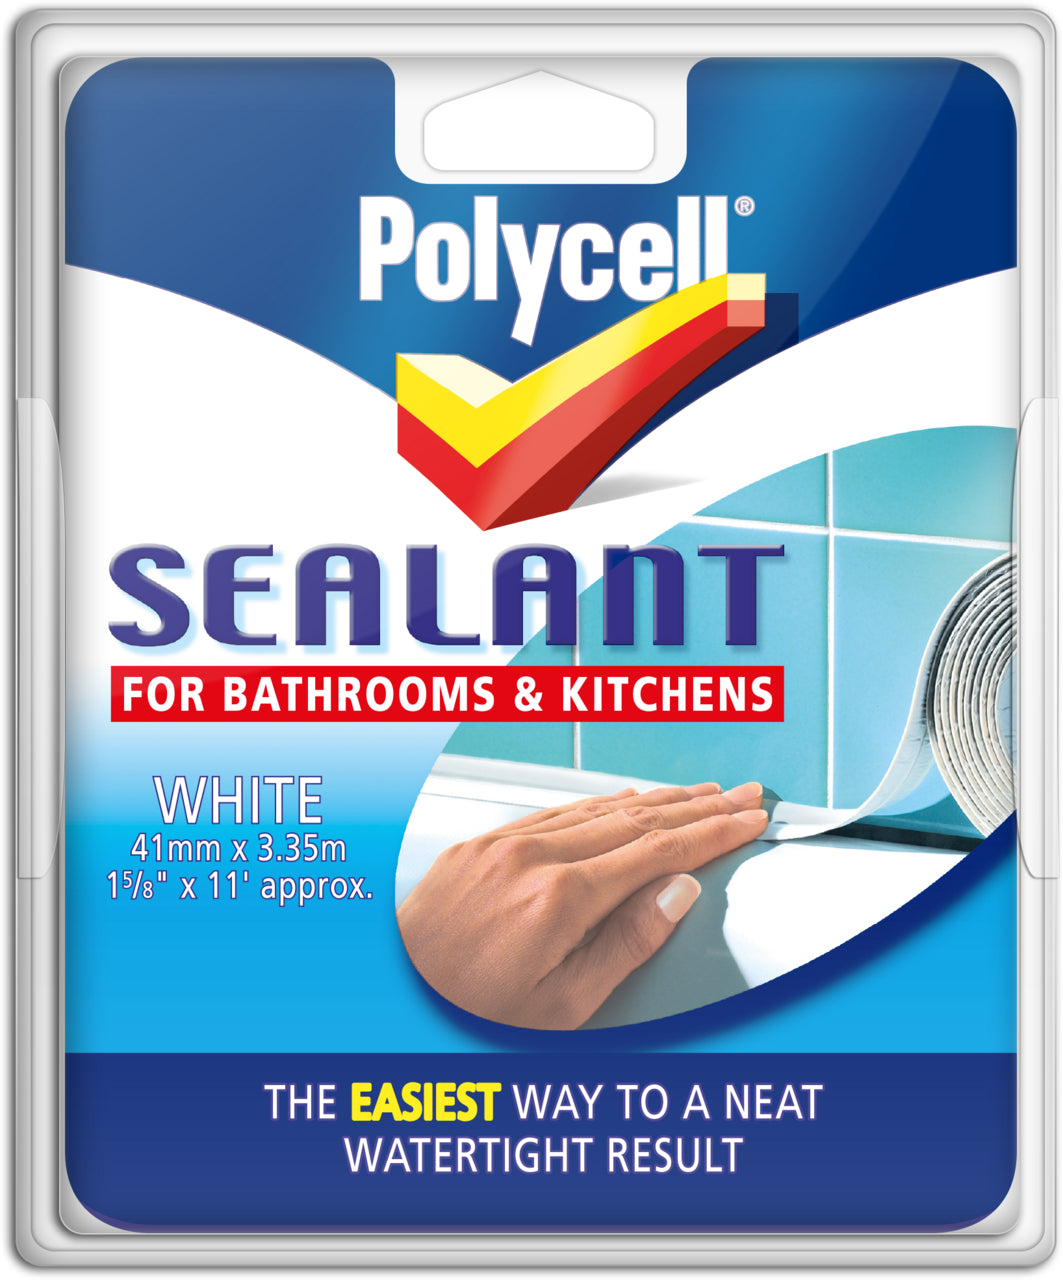 Polycell Sealant Bathroom & Kitchen White 41mm